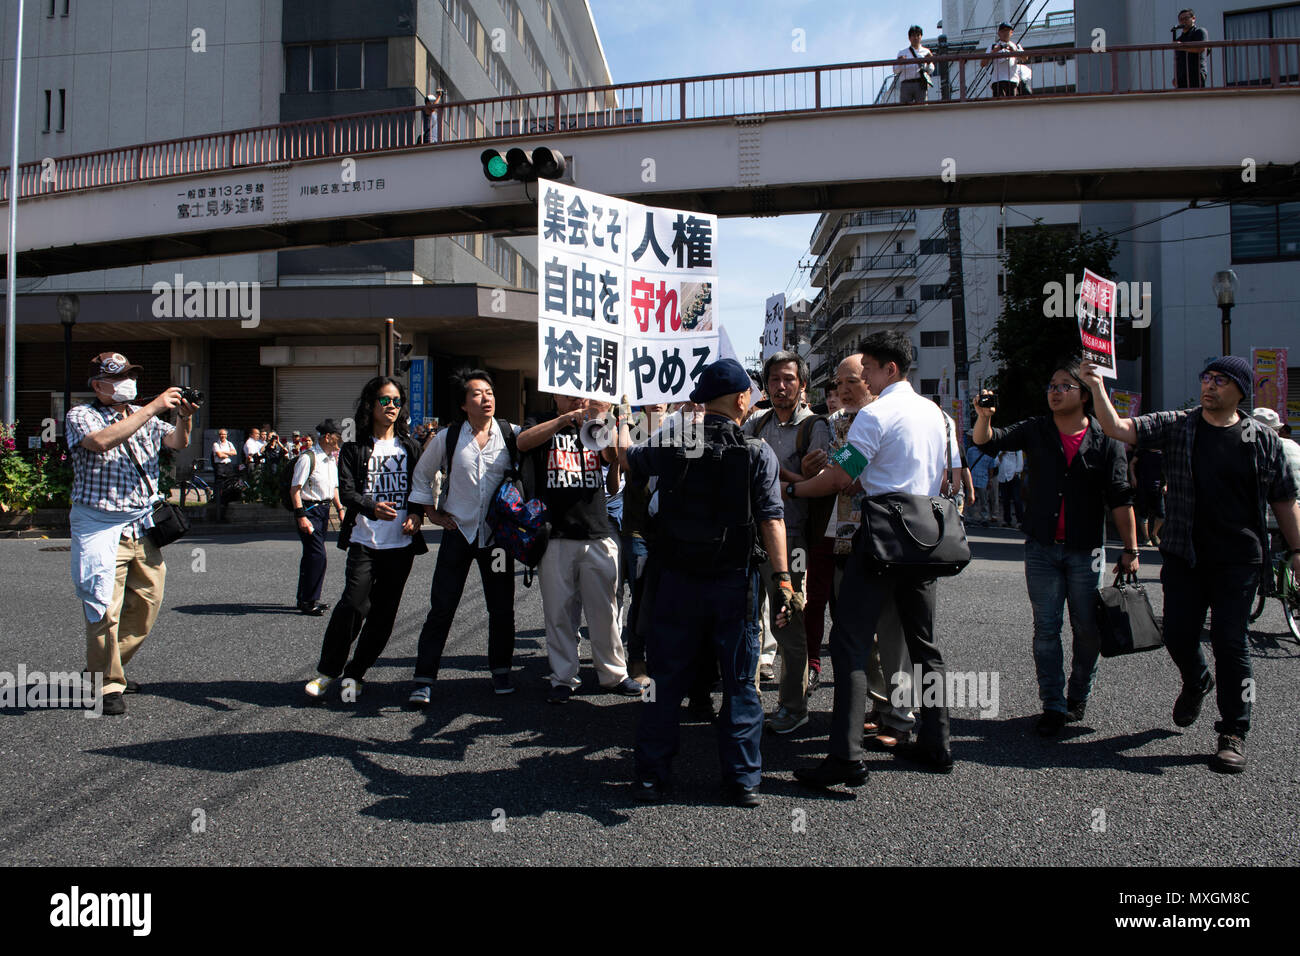 KAWASAKI, JAPAN - JUNE 03: Protesters holding up signs, including one saying 'NO HATE & NO RACISM' gather in front of Educational Cultural Hall in Kawasaki, Kanagawa prefecture, Japan on June 3, 2018. The anti-racist group forcefully stop the nationalists attendees from entering the building for a planned meeting by a hate speech members in Kanto region following a scuffle with the police, nationalists and the protesters. (Photo: Richard Atrero de Guzman/Aflo) Stock Photo